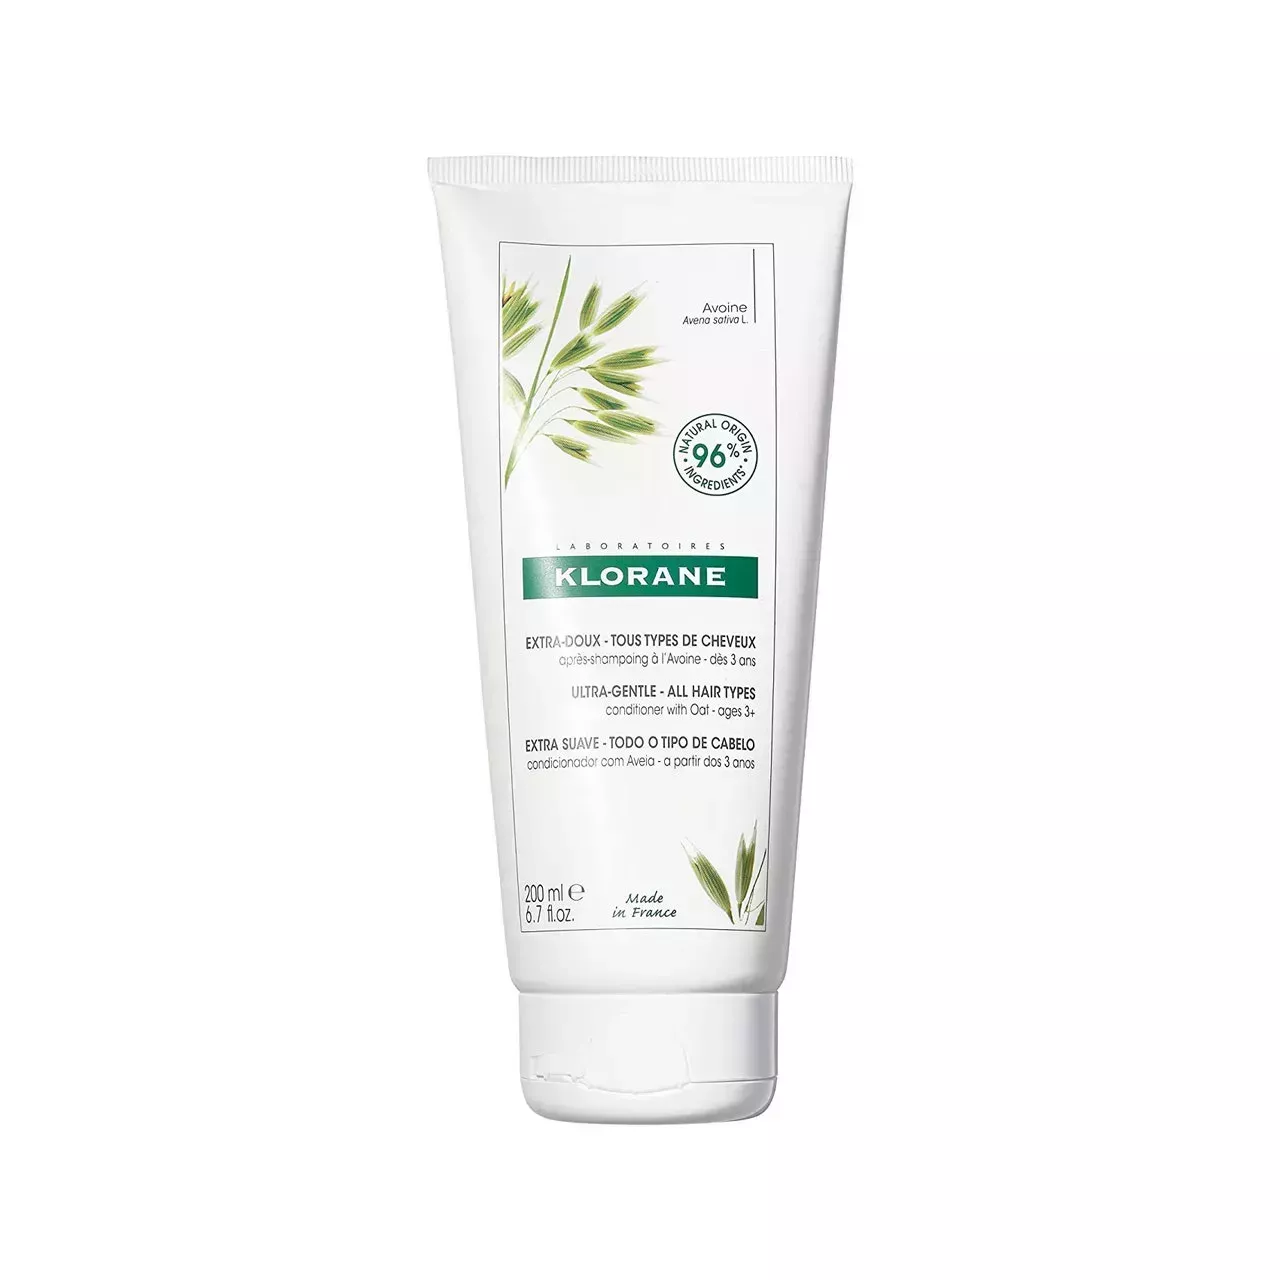 Klorane Ultra-Gentle Conditioner with Oat Milk white tube with small green plant designs on white background